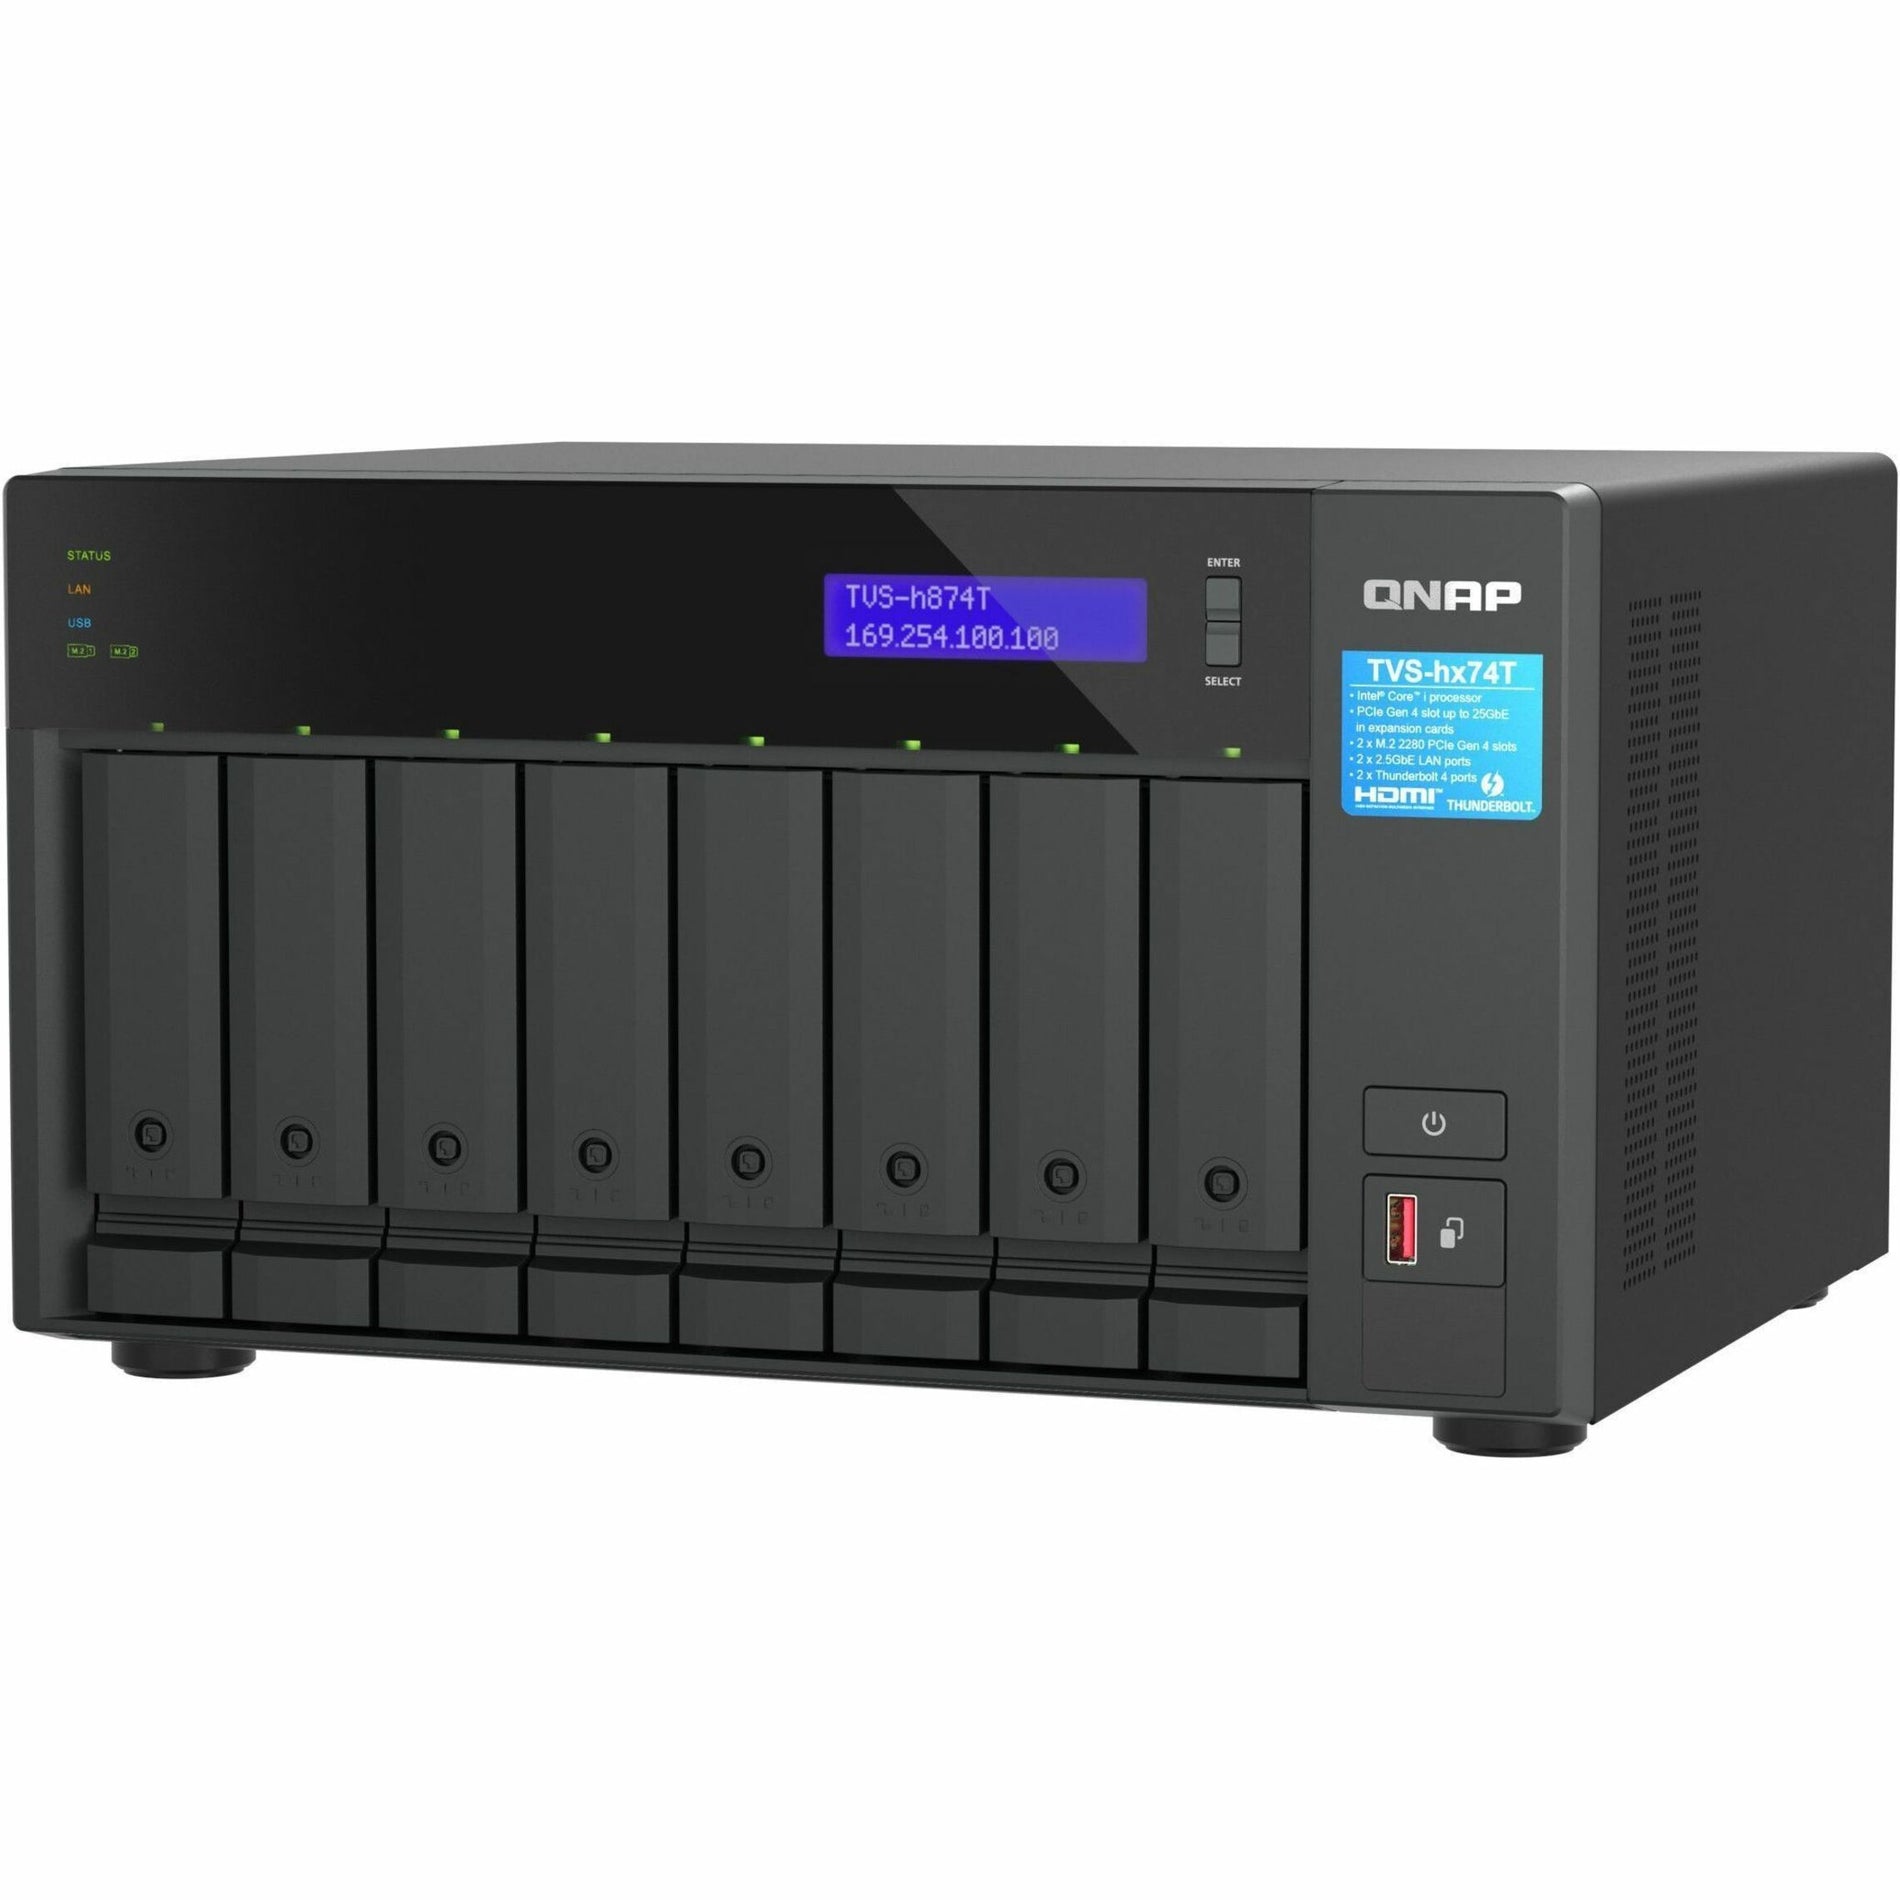 QNAP TVS-h874T-i7-32G NAS Storage System TVS-H874T-I7-32G-US TVS-h874T-i7-32G, High-Performance NAS Storage System with 32GB Memory, 8 Bays, and 2.5 Gigabit Ethernet